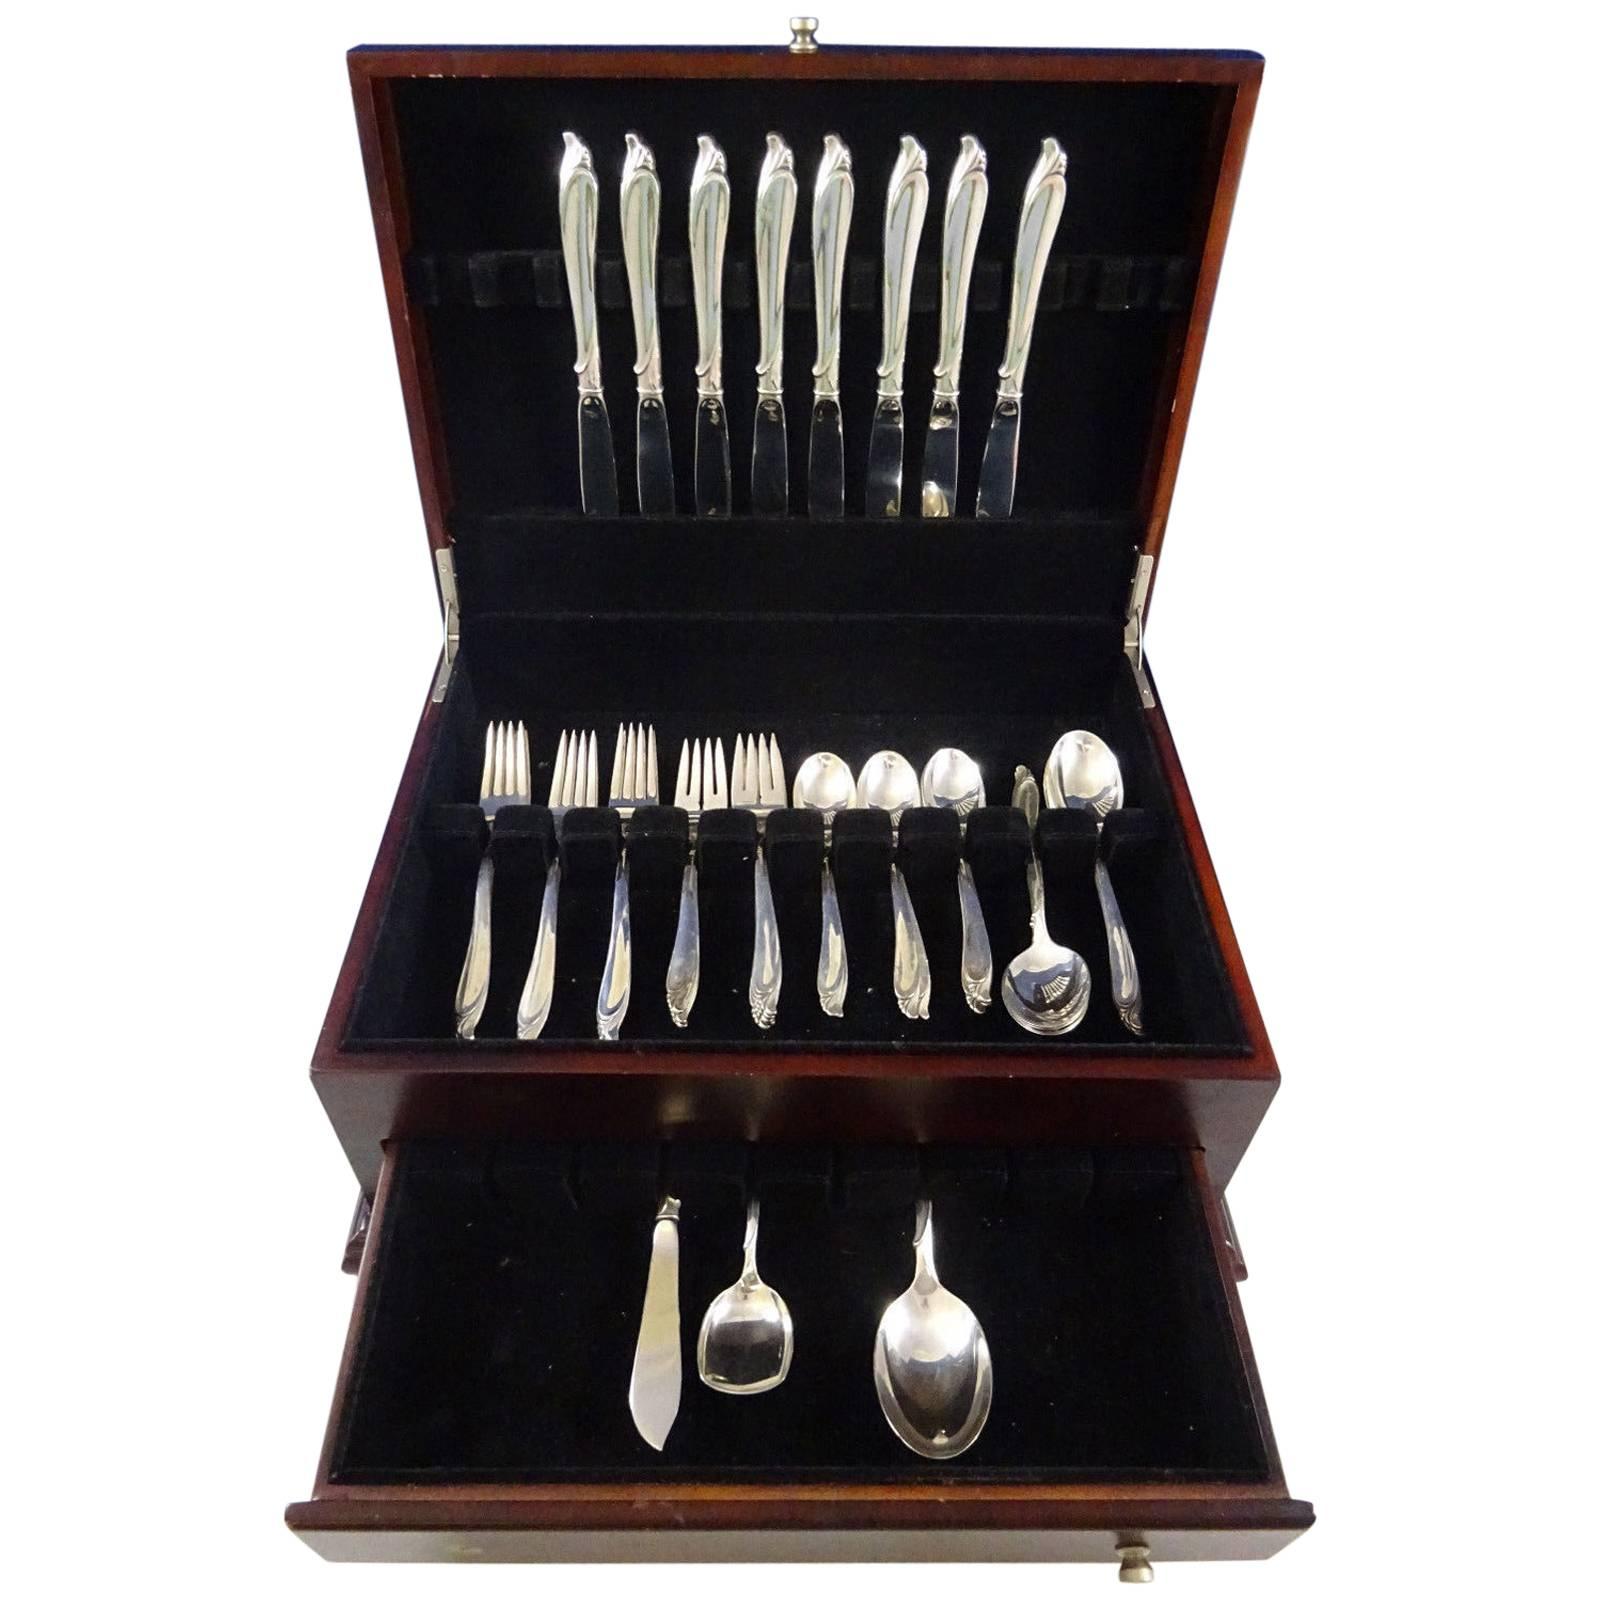 Mid-Century Modern sculptured beauty by International sterling silver flatware set of 43 pieces. This set includes:

Eight knives, 9 1/4